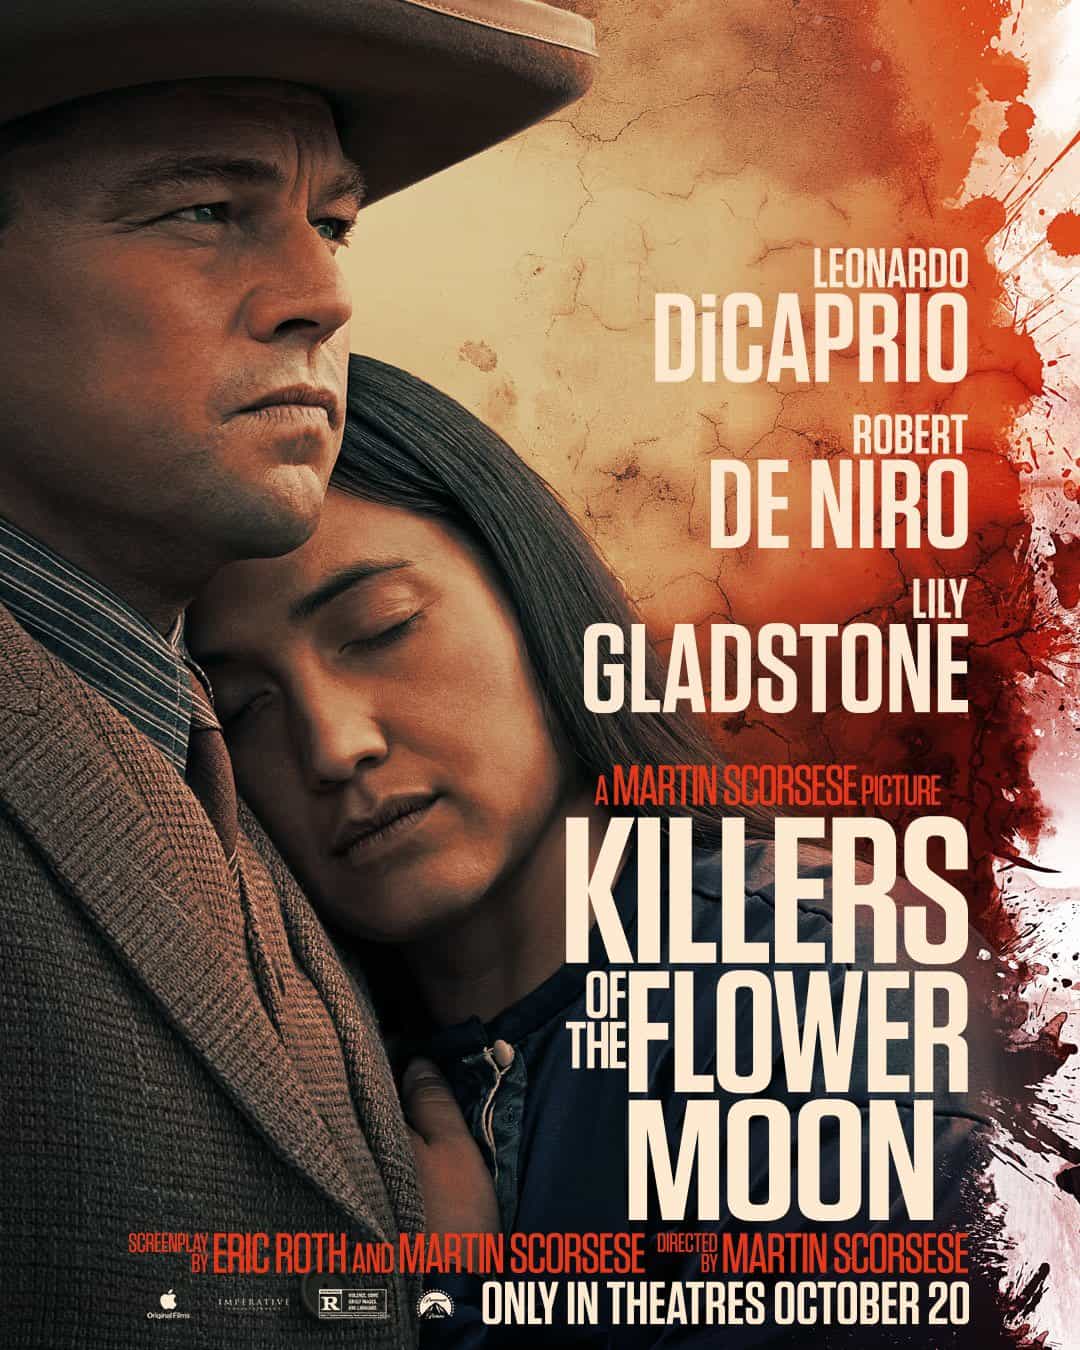 New poster has been released for Killers of the Flower Moon which stars Leonardo DiCaprio and Robert De Niro - movie UK release date 20th October 2023 #killersoftheflowermoon